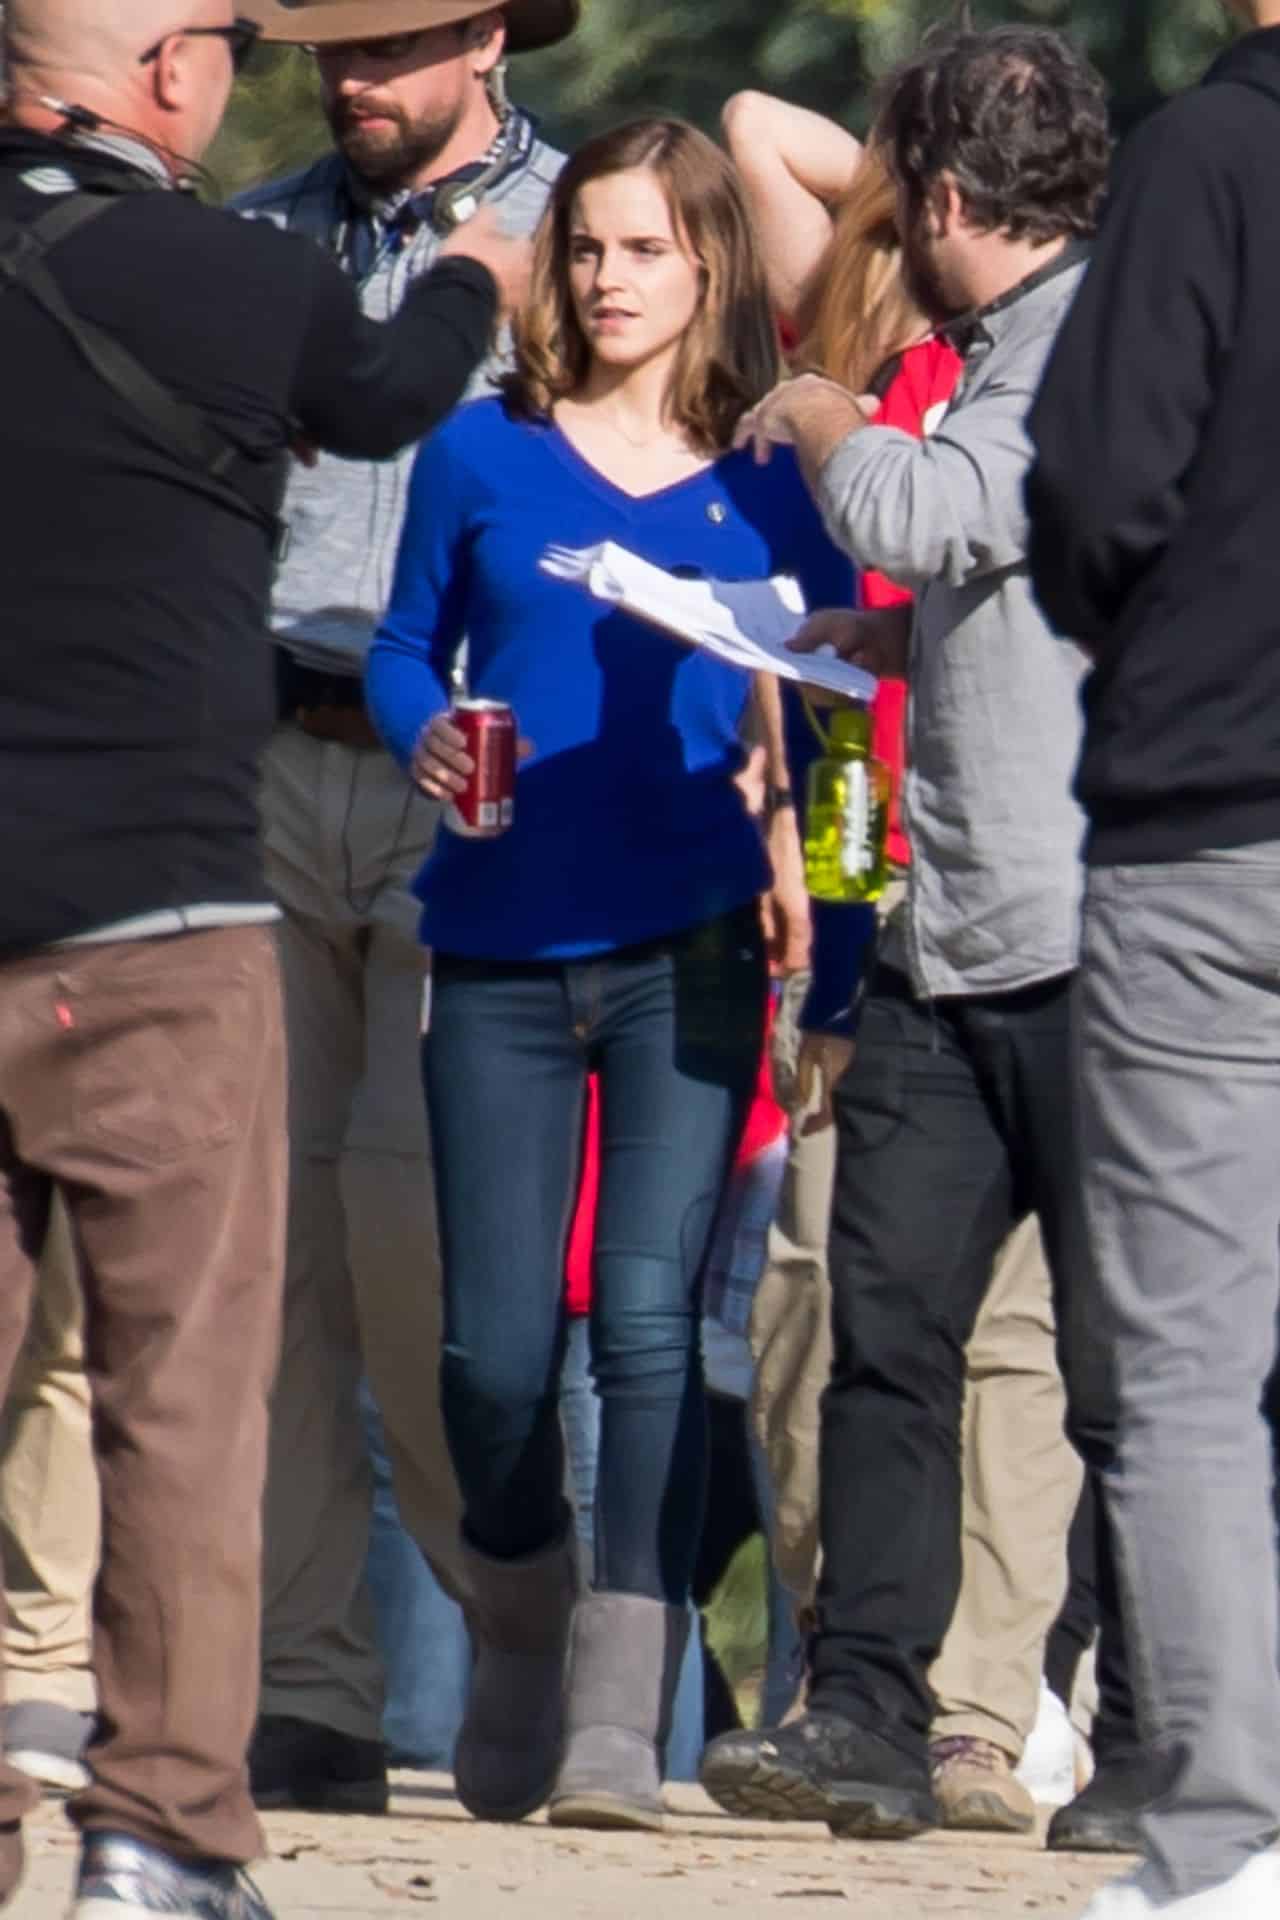 Emma Watson Stuns in a Blue Sweater and Jeans on the Set of “The Circle”